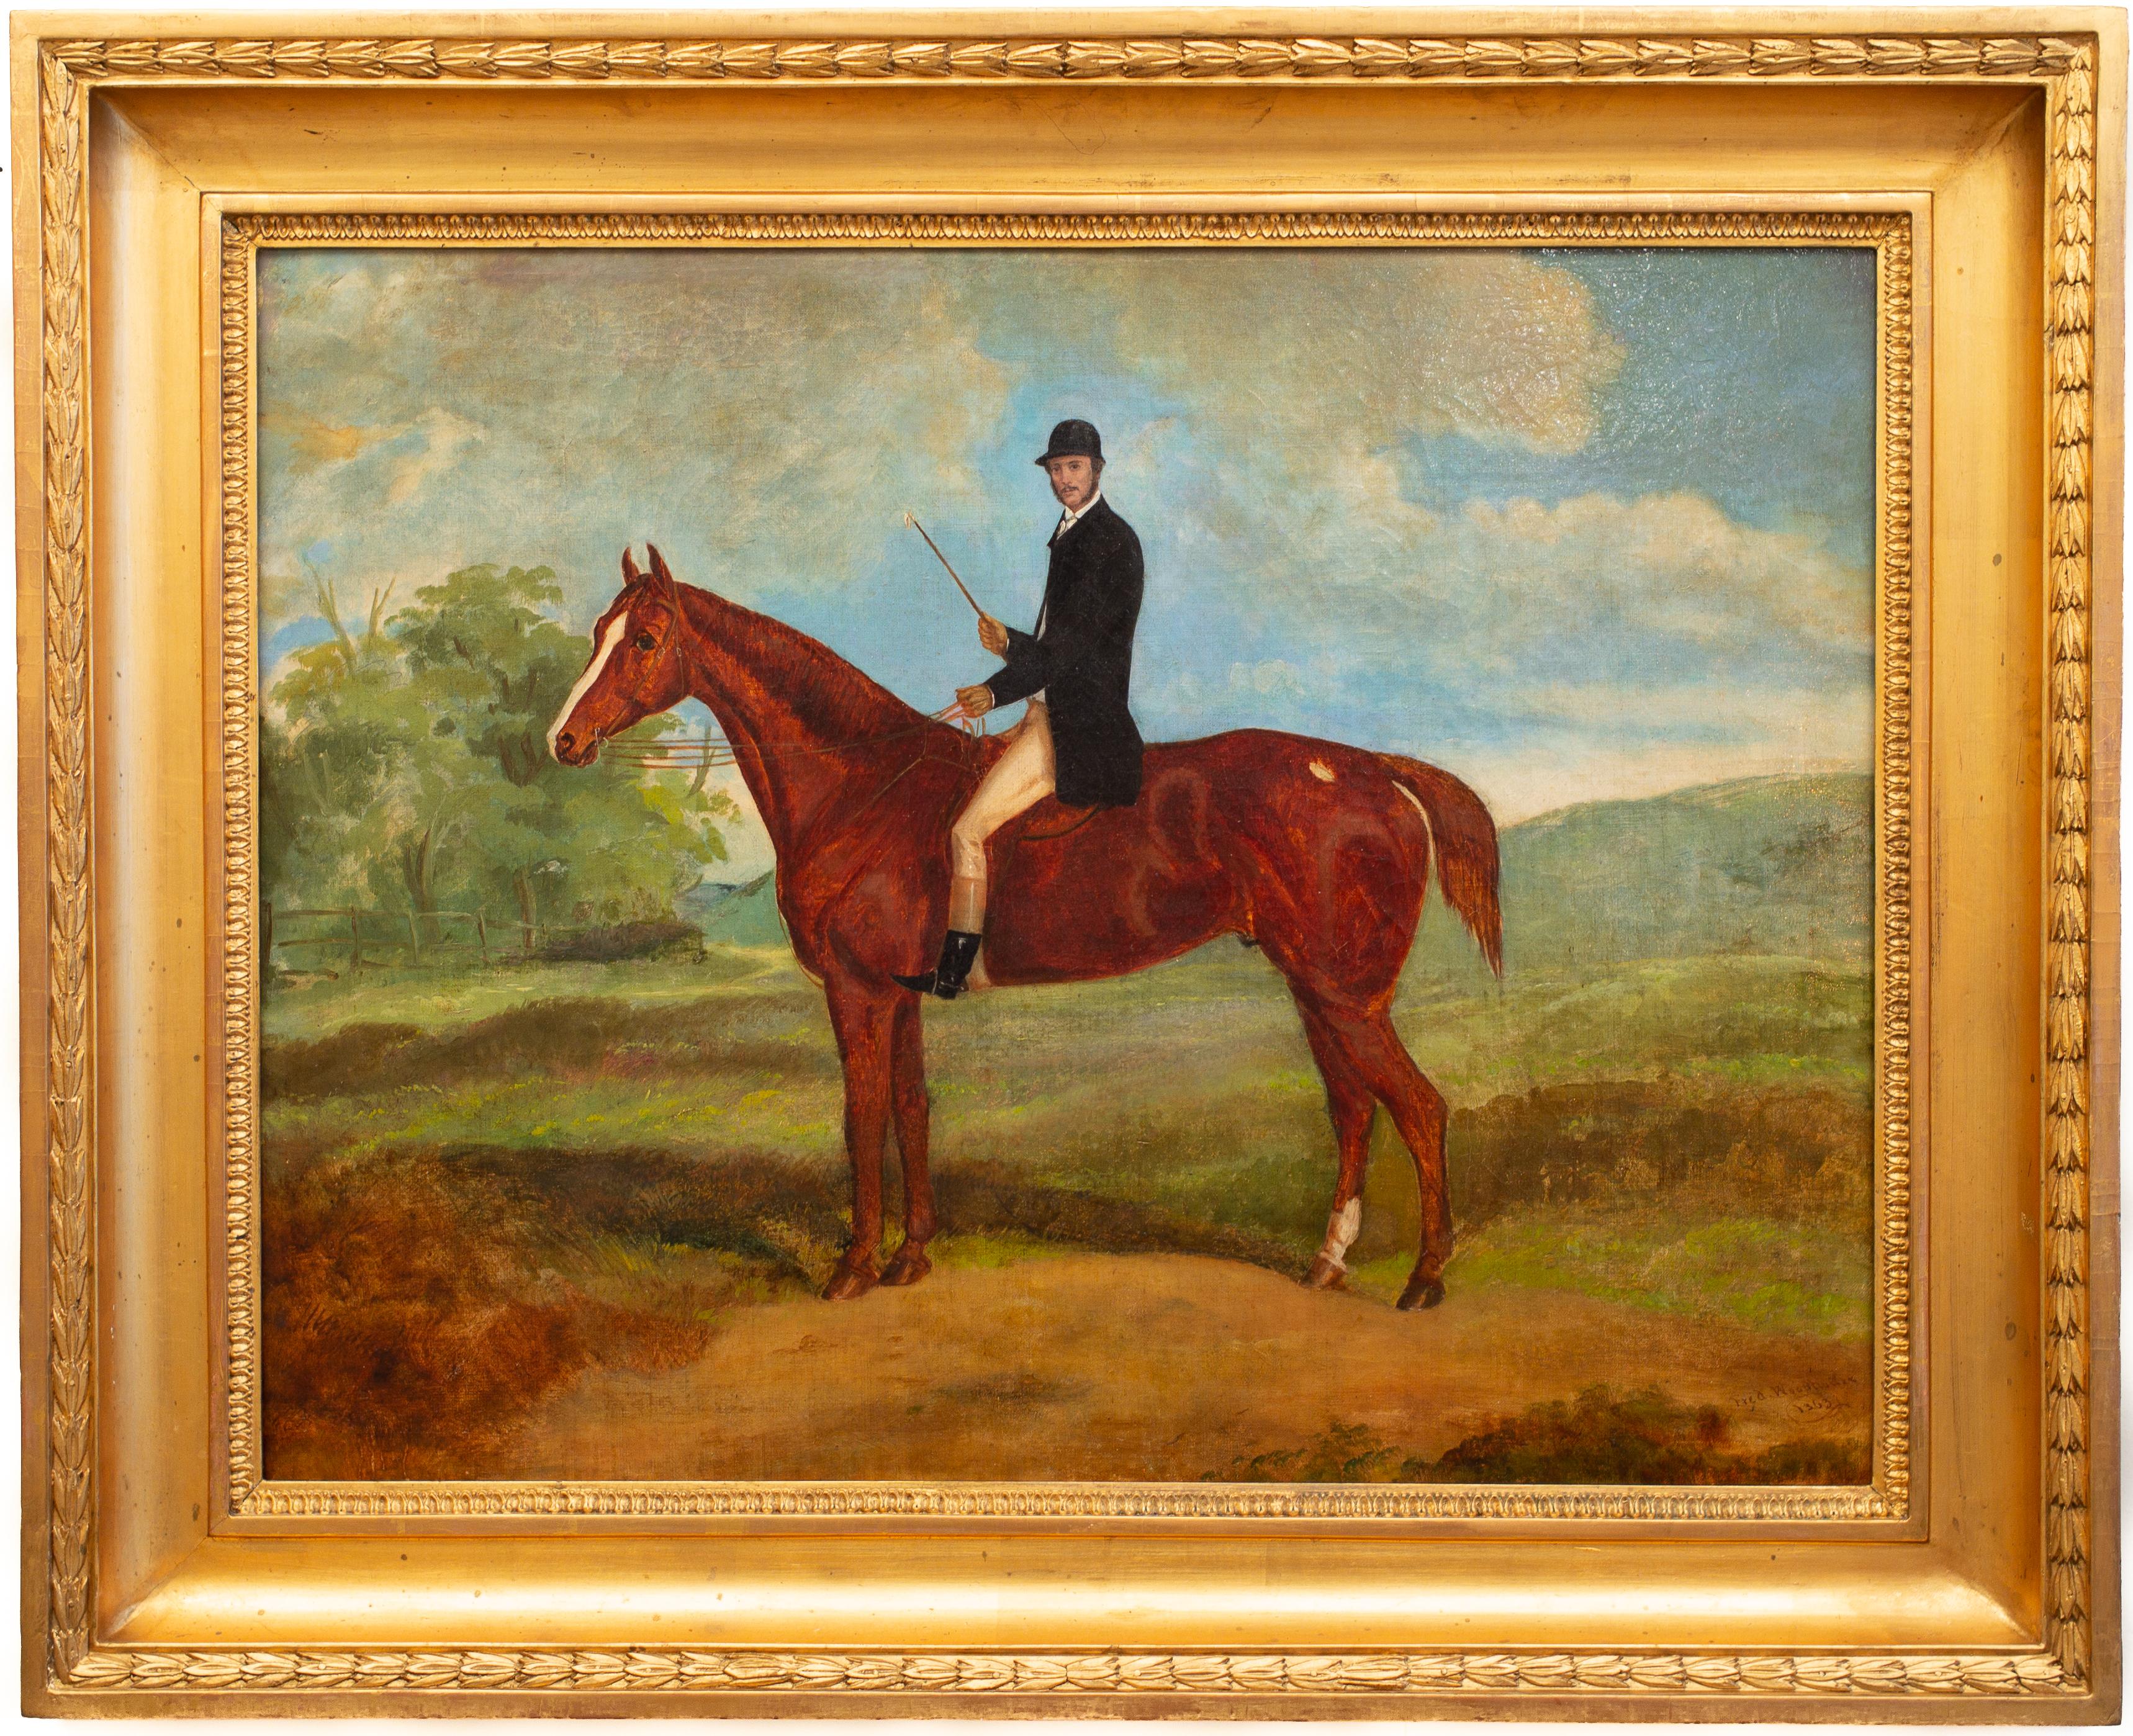 Frederick Woodhouse Sr. Landscape Painting - A Gentleman Rider on a Horse, Oil on Canvas, 1863, Signed, Free Shipping 